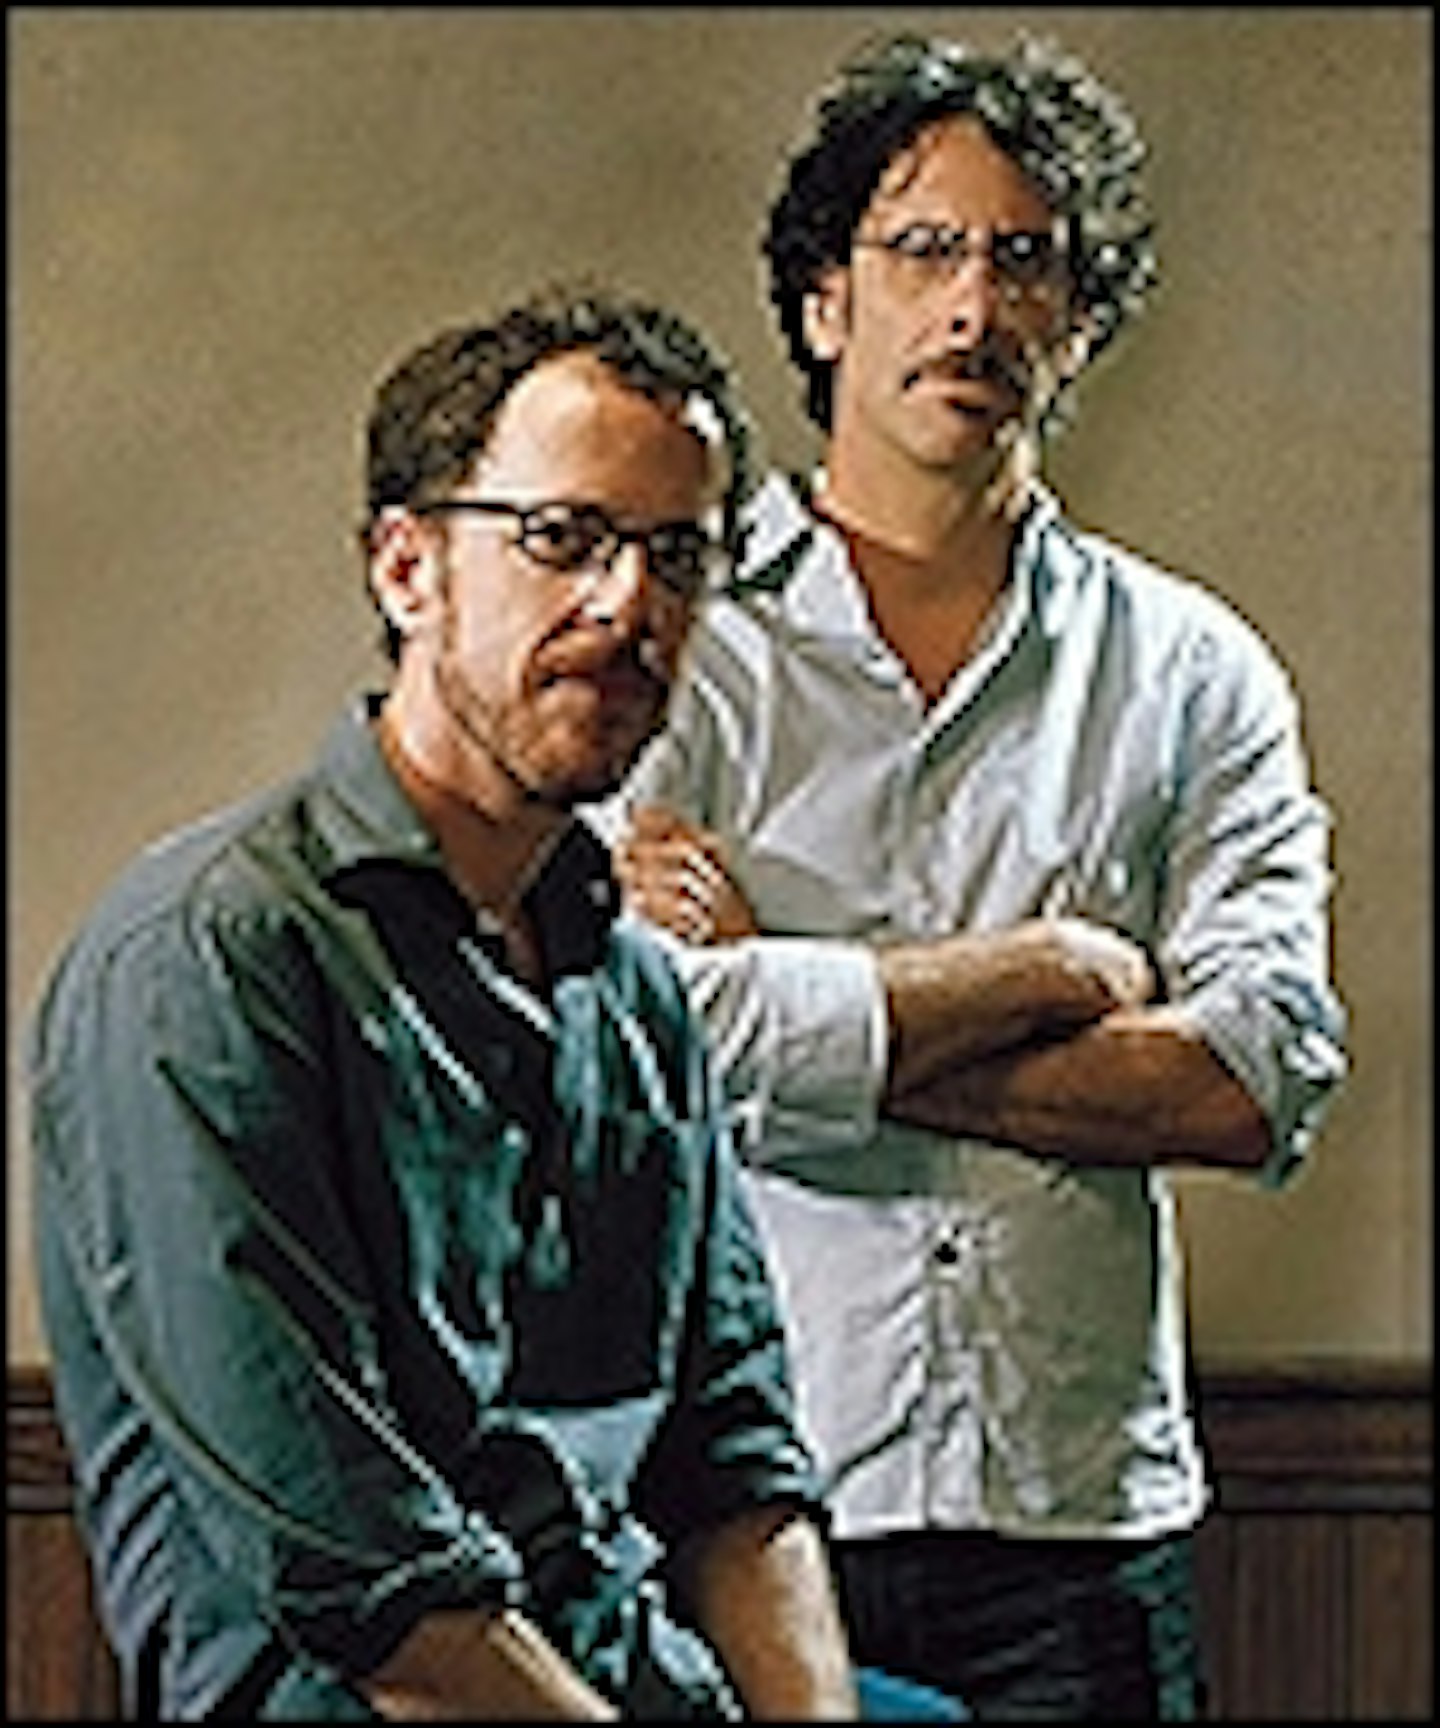 Coen Brothers Planning Musical Biopic?